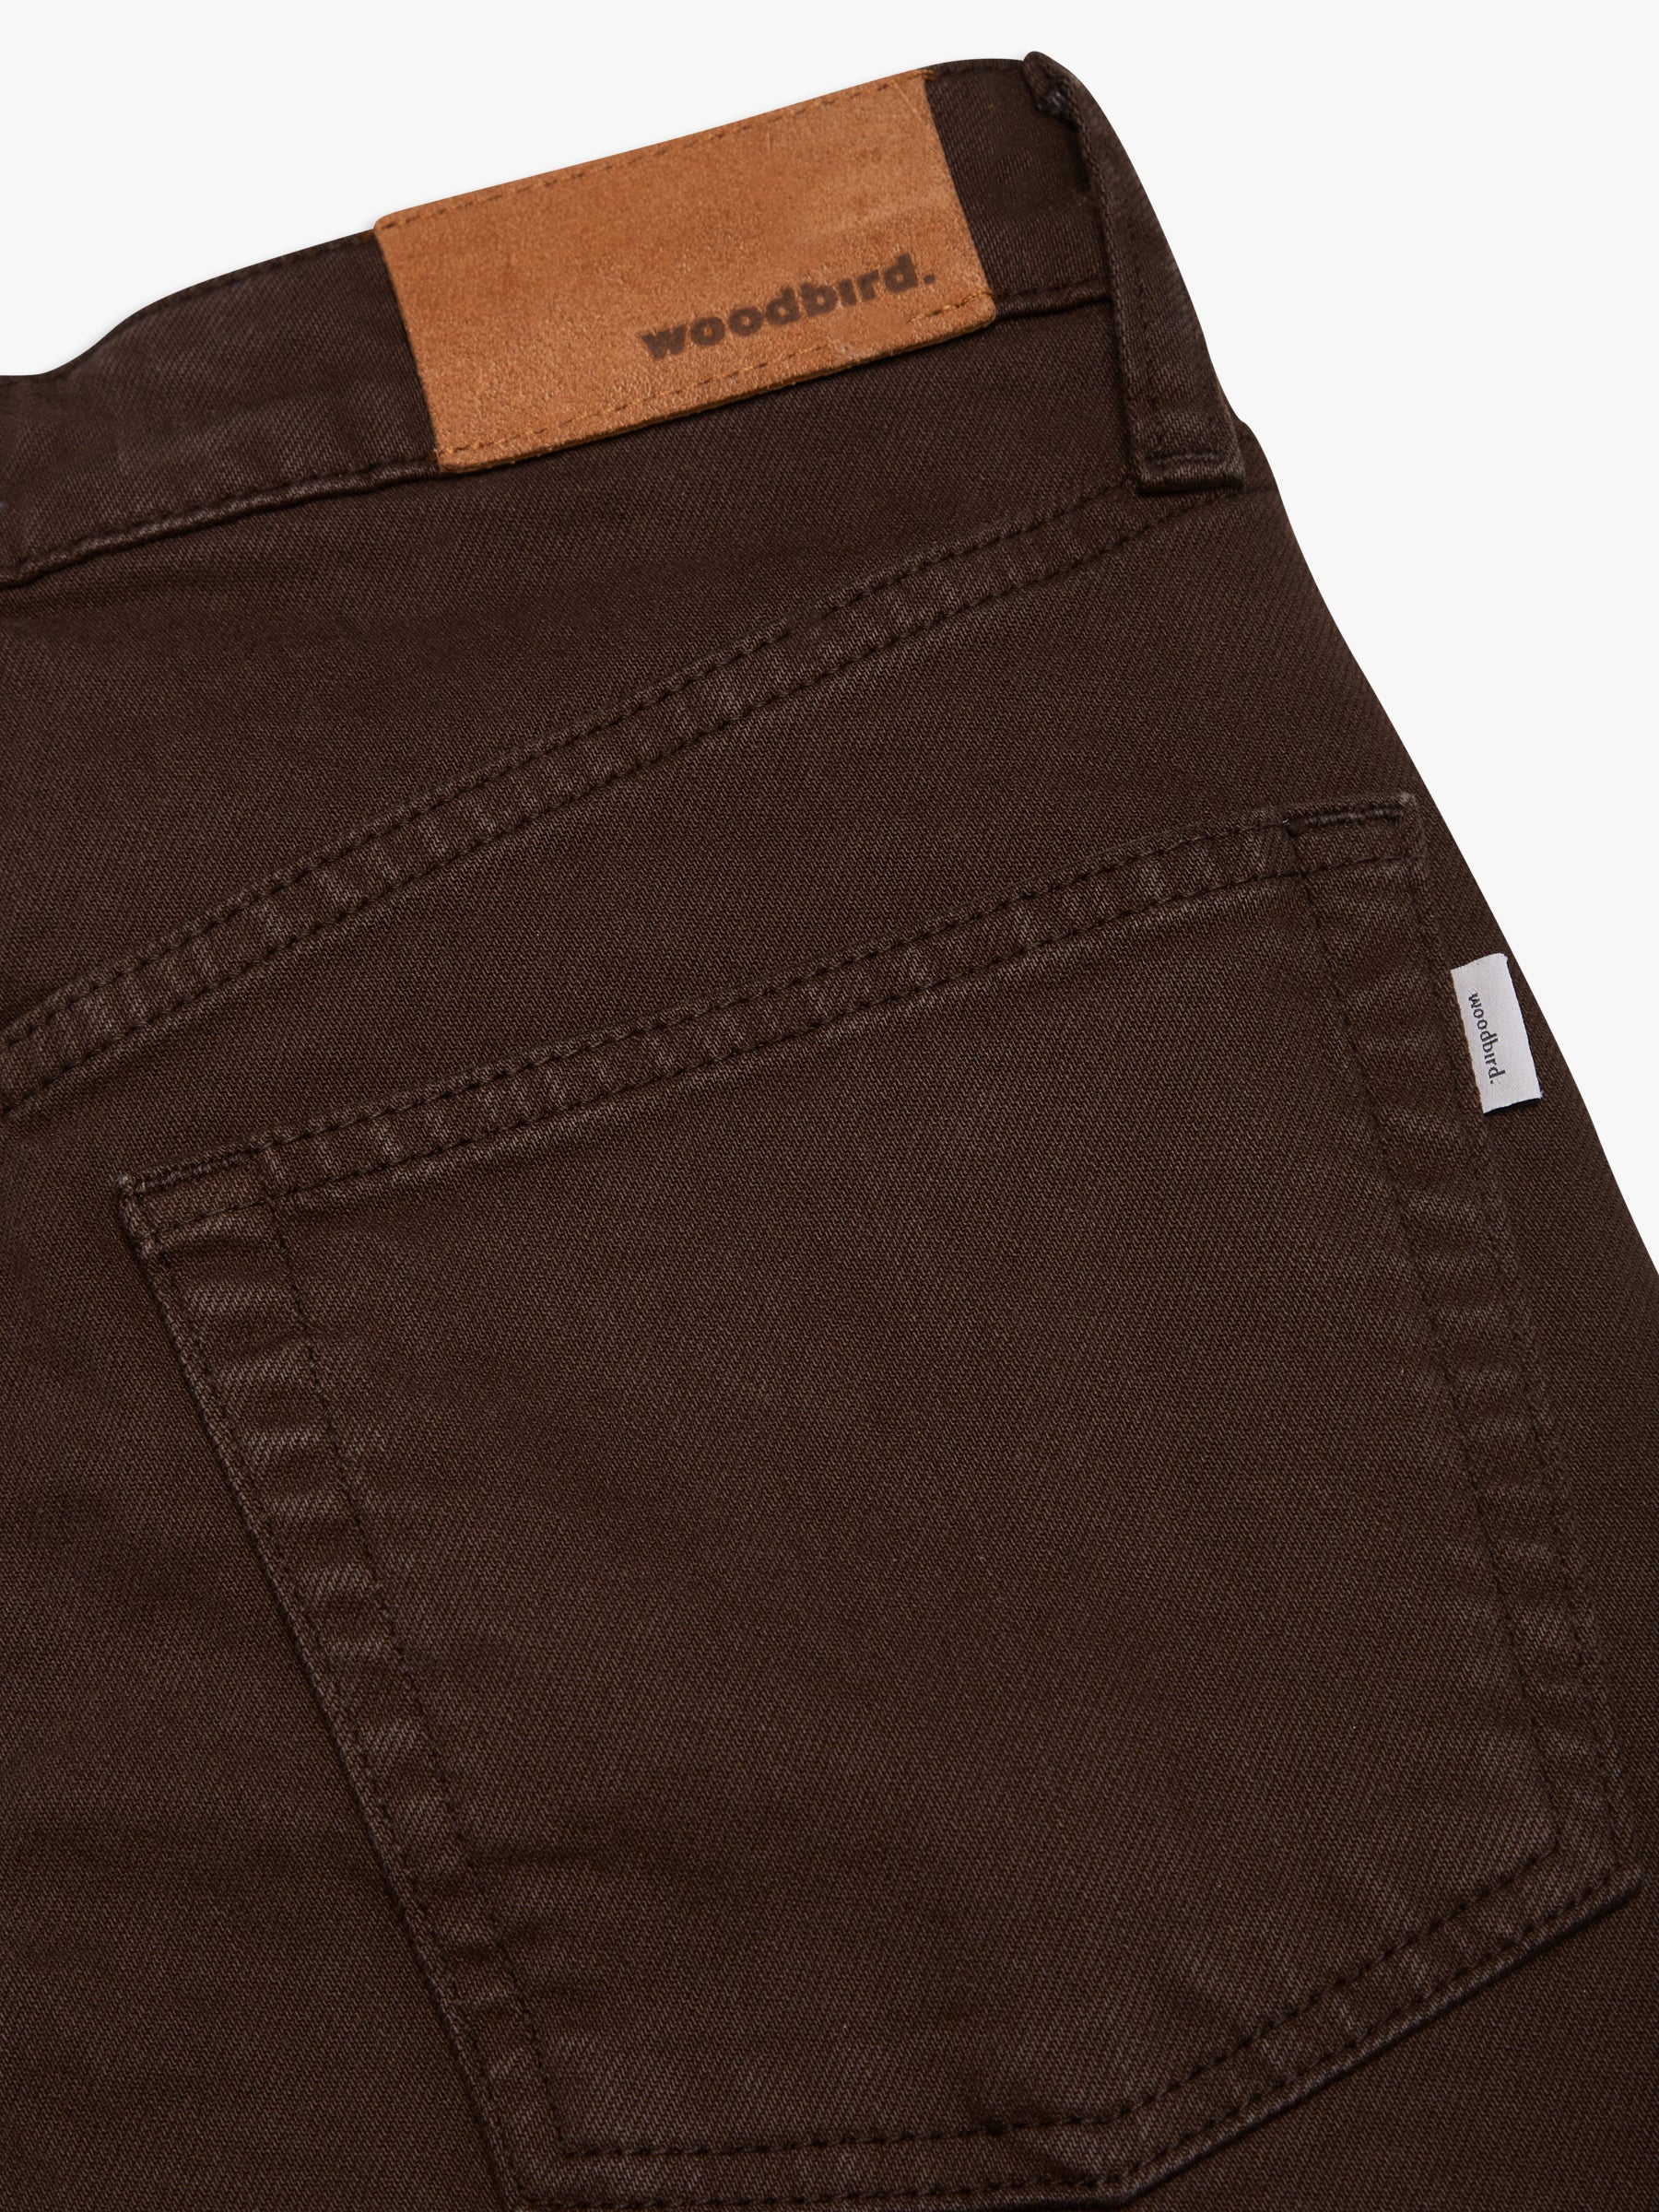 Woodbird Female Maria Color Jeans Jeans Brown